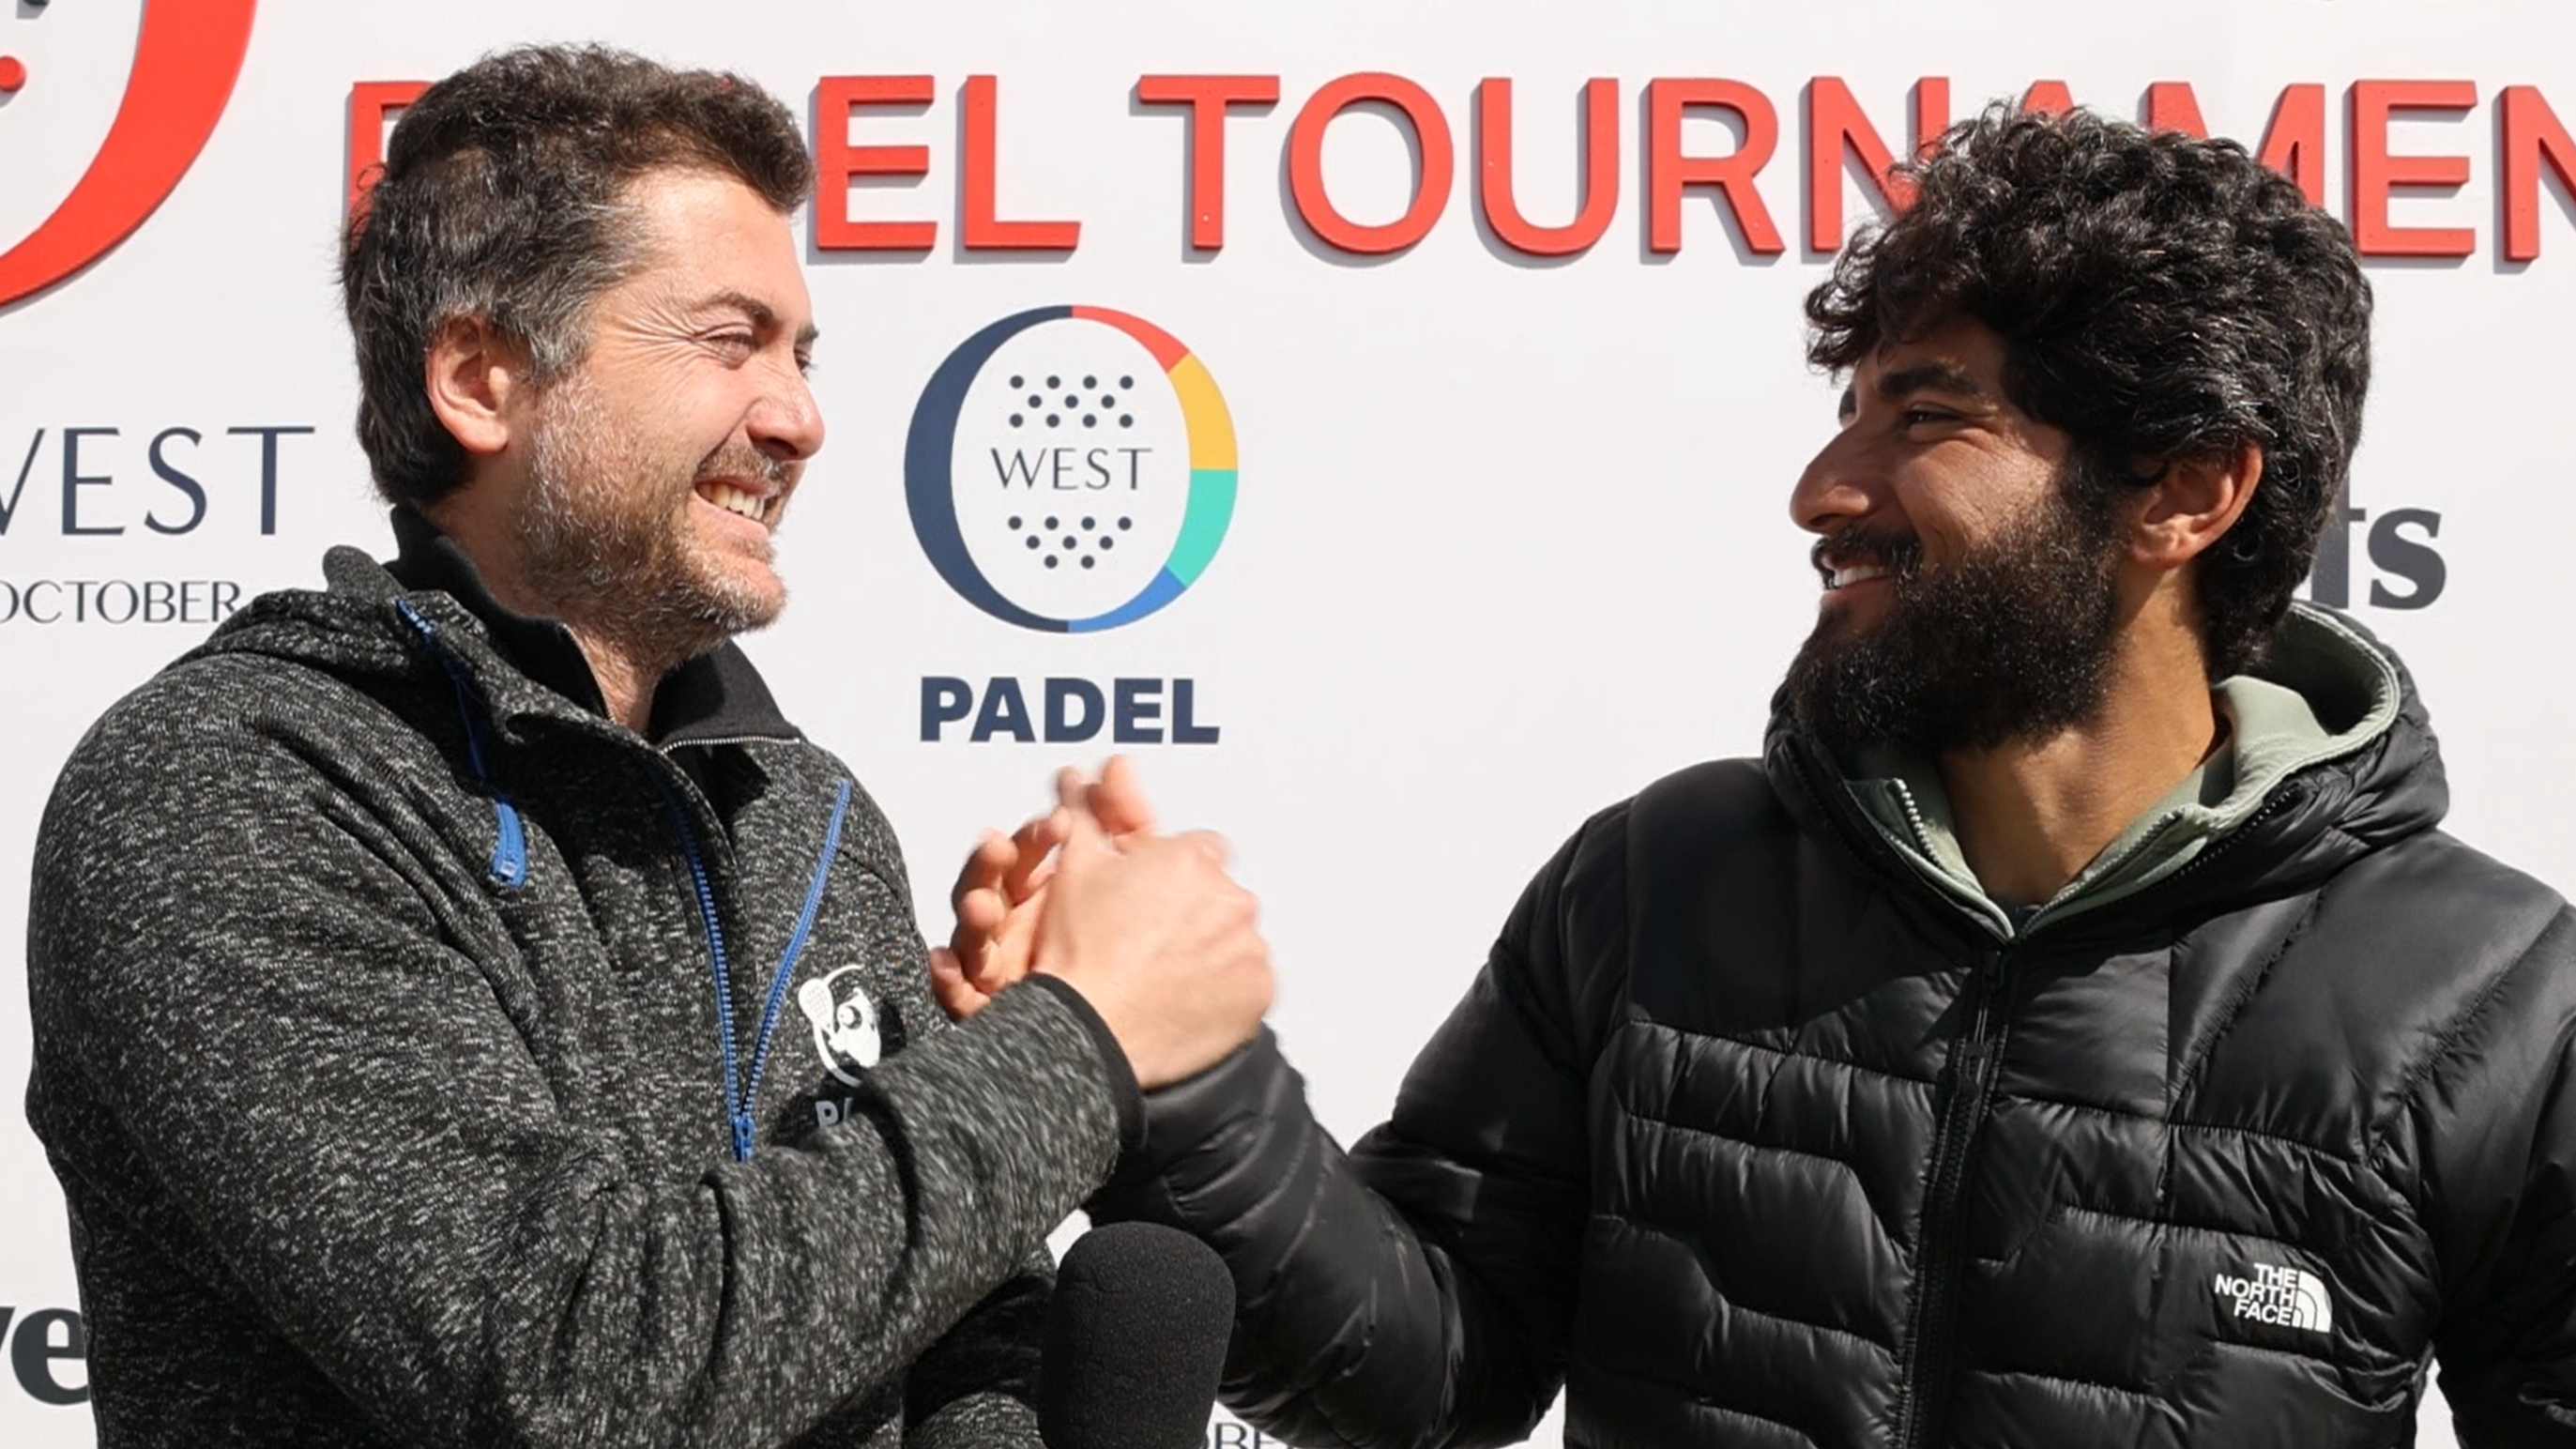 Seif Abusena: “The padel will overtake squash in Egypt”